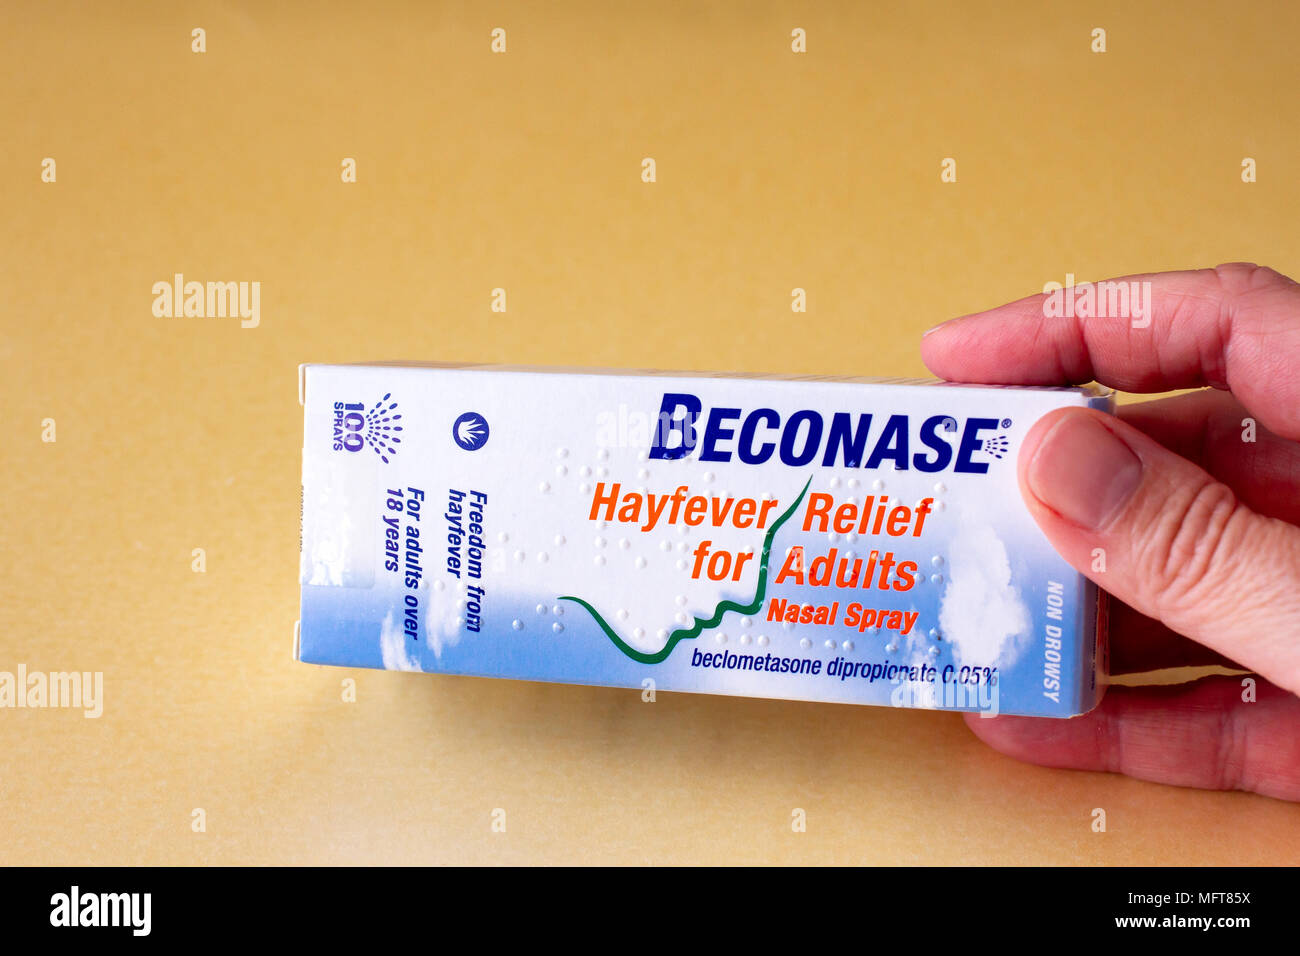 Female hand holding a box containing a Beconase nasal spray, hayfever allergy relief, United Kingdom Stock Photo